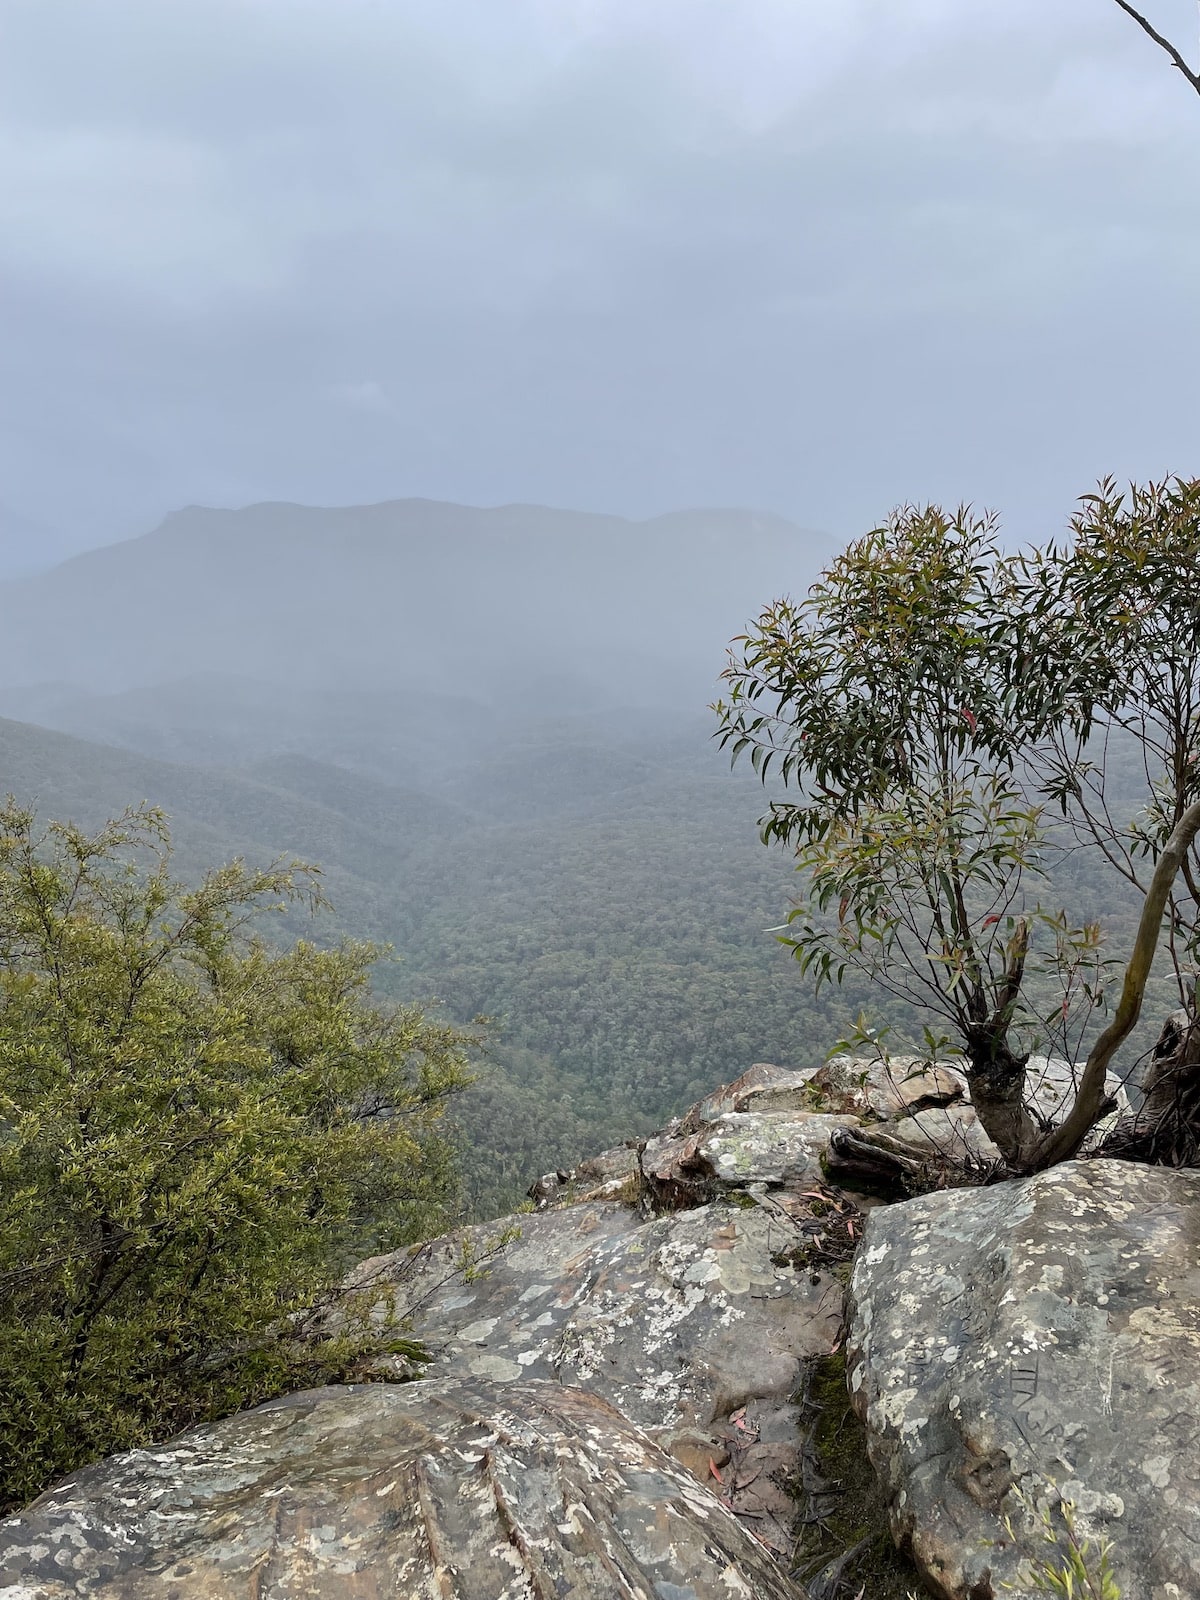 A foggy mountain valley as seen from a rocky cliff edge